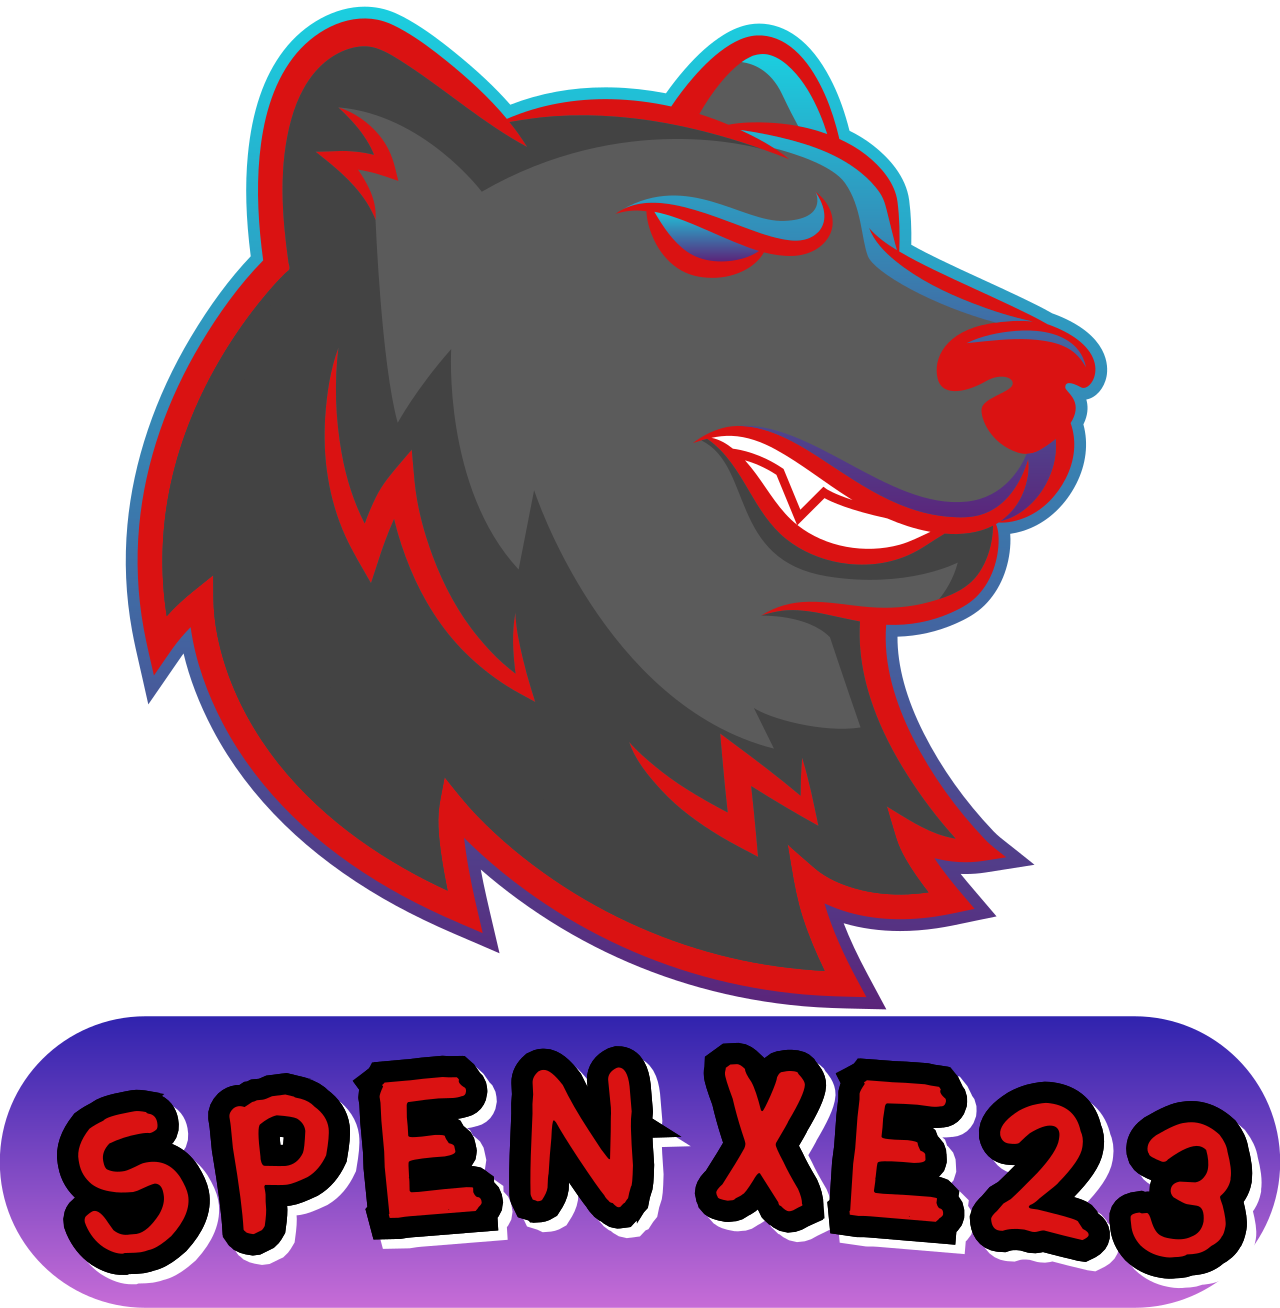 SPenxe23's web page